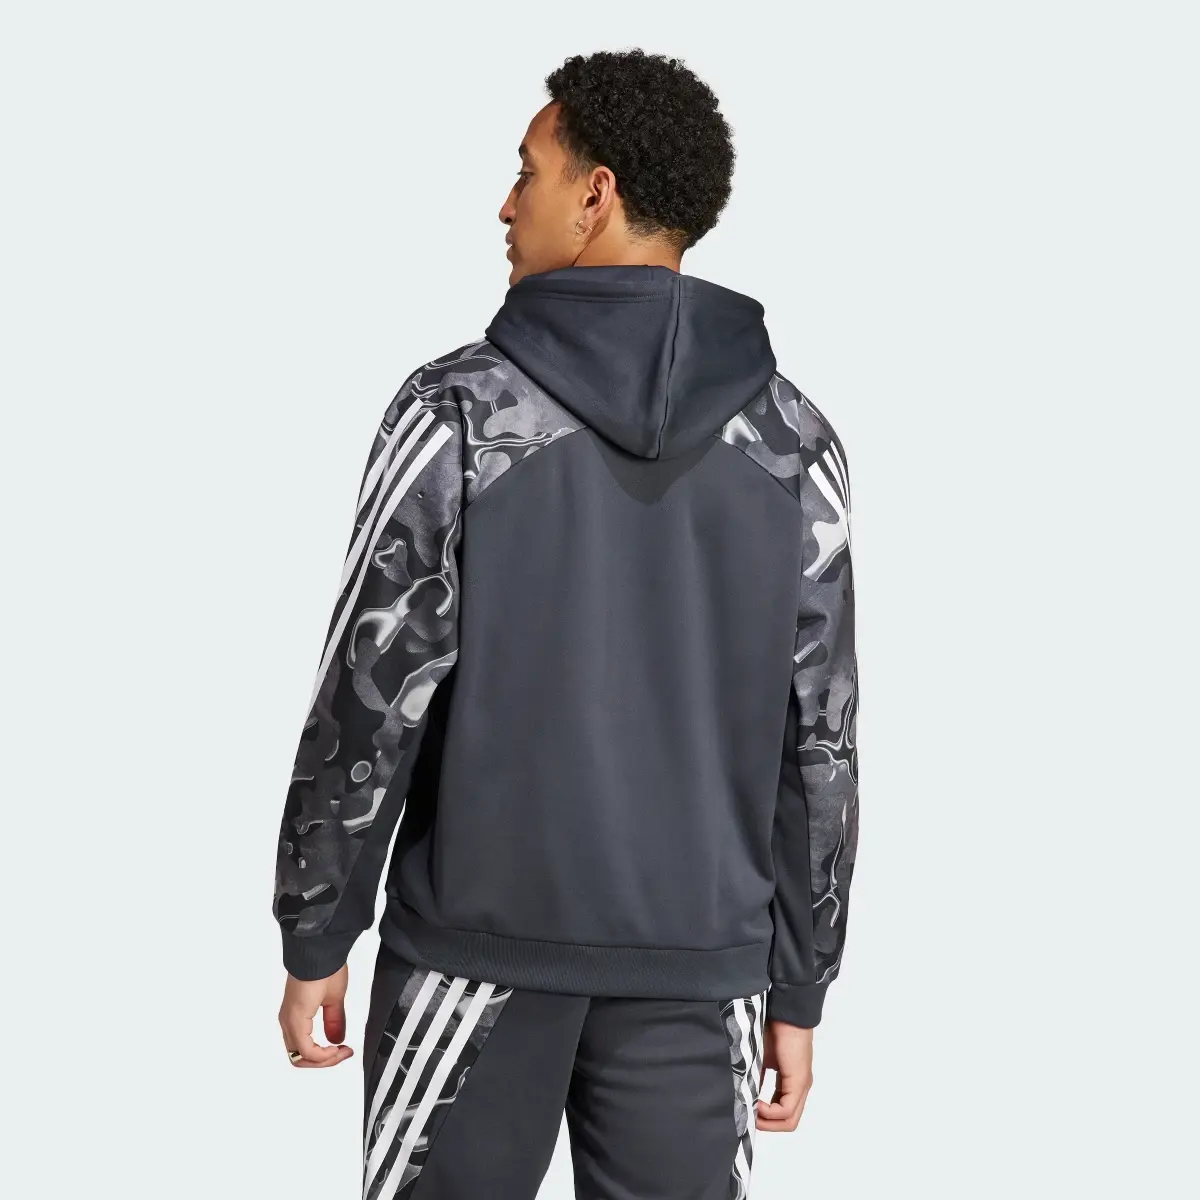 Adidas Future Icons Allover Print Hoodie. 3